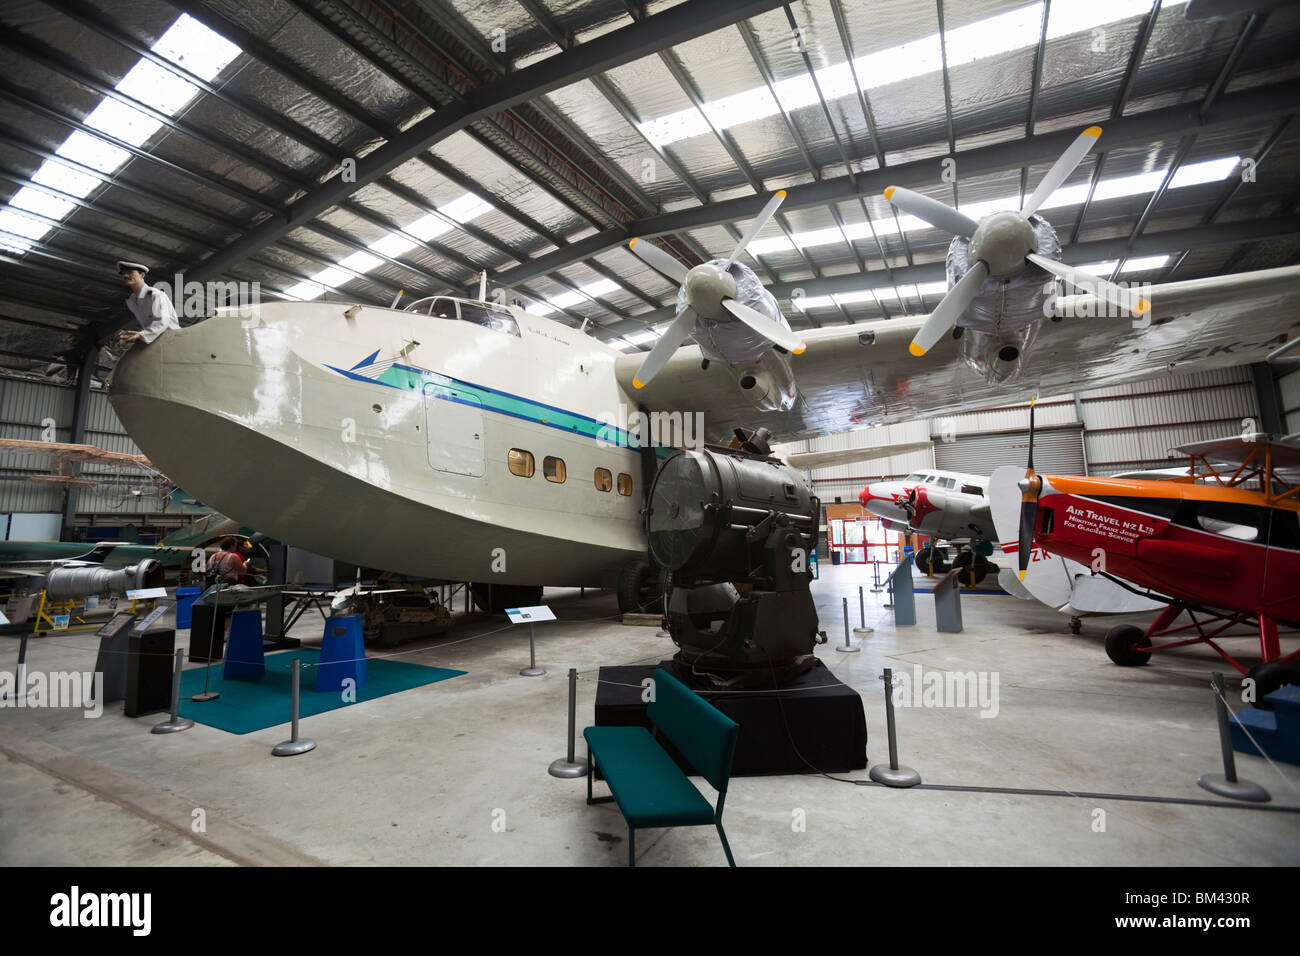 Solent flying boat.  Museum of Transport and Technology (MOTAT), Auckland, North Island, New Zealand Stock Photo